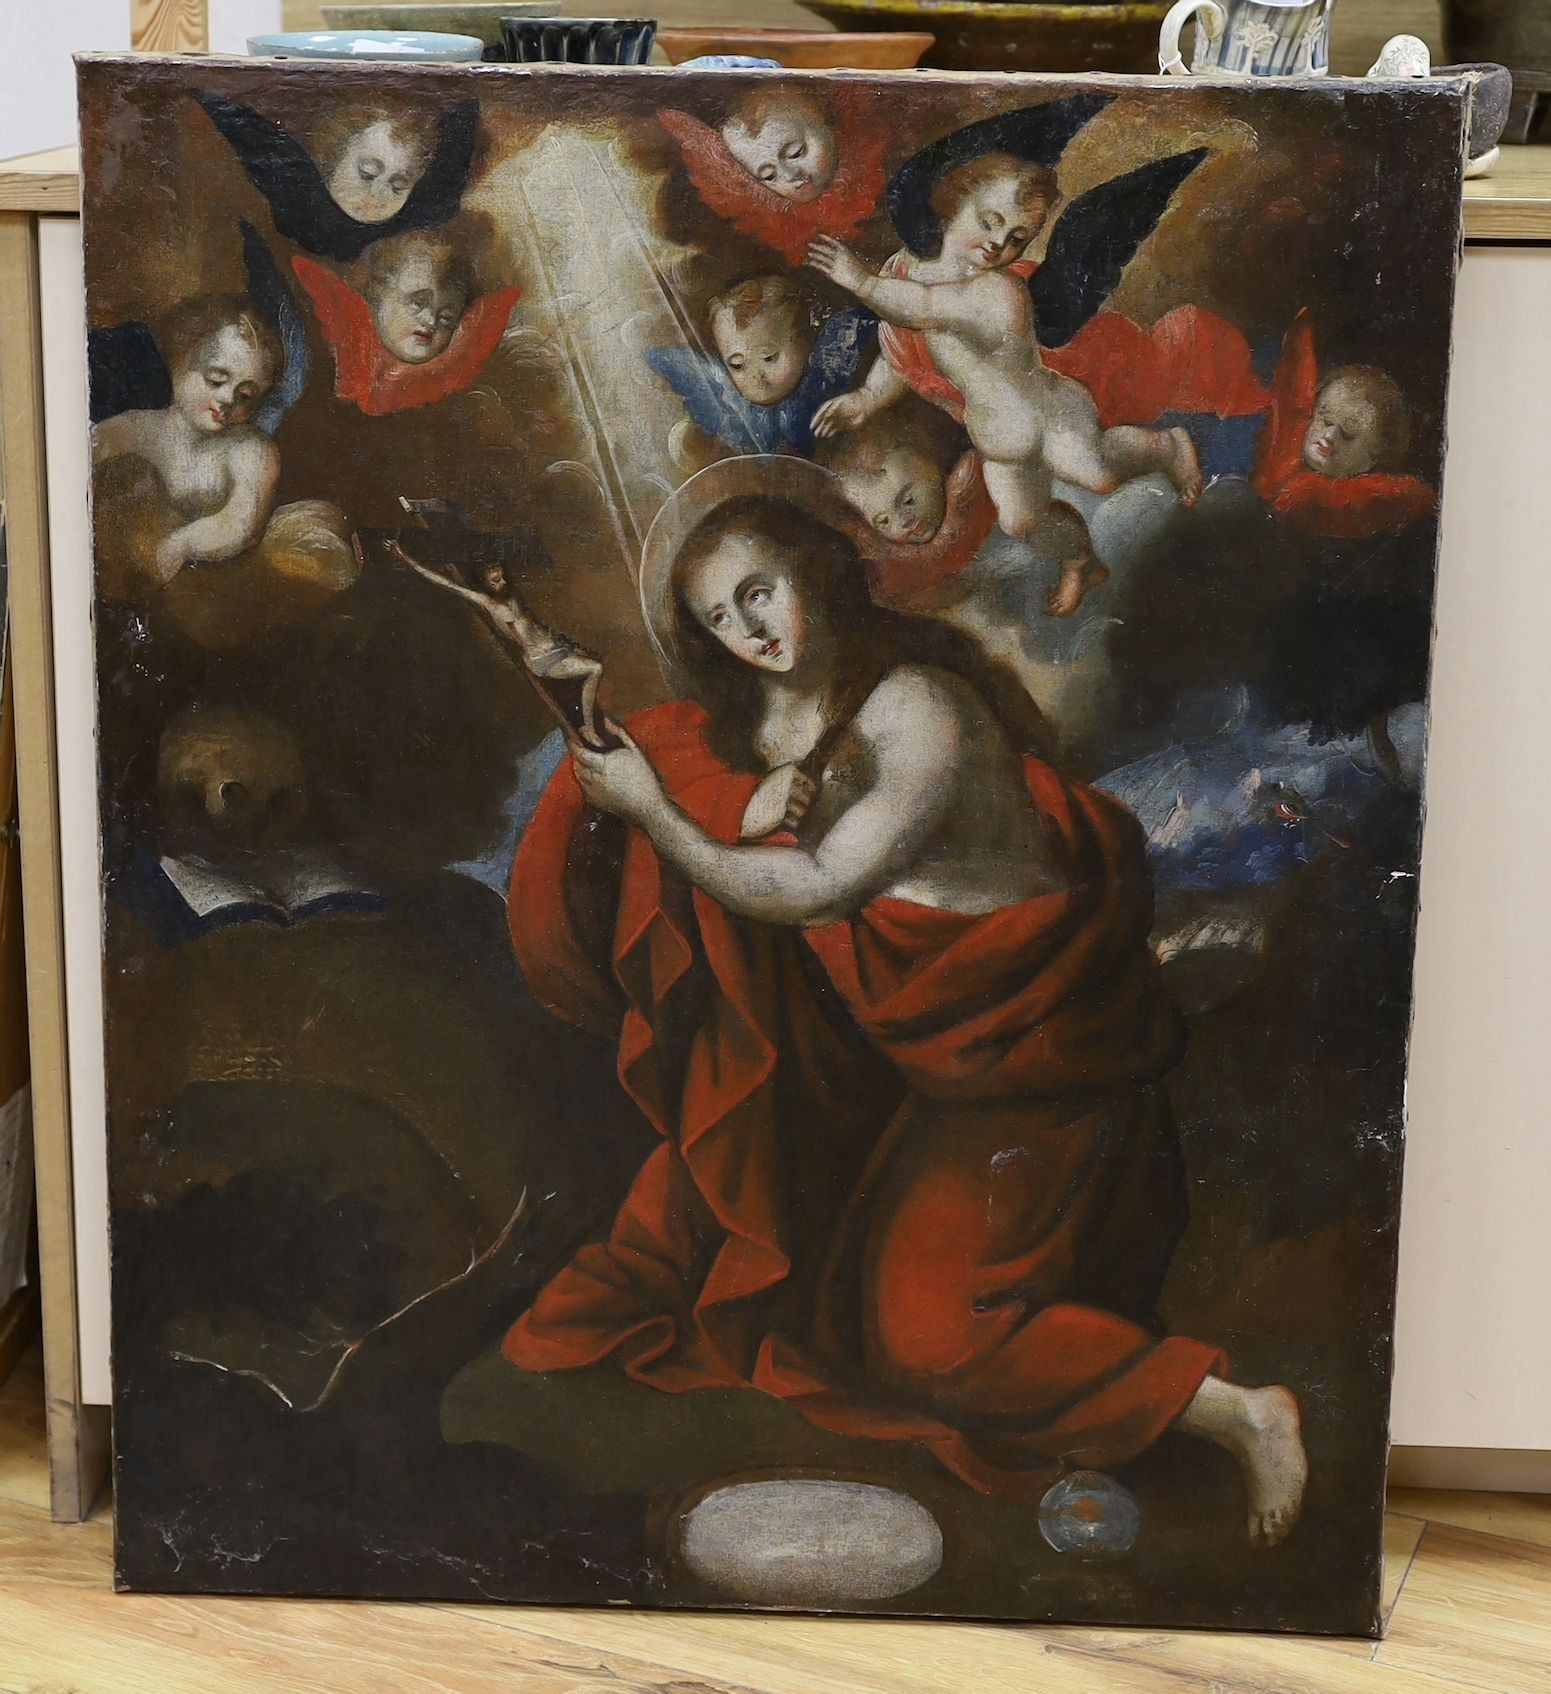 Early 19th century Spanish School, oil on canvas, Saint at prayer holding a crucifix, 80 x 67cm, - Image 2 of 3